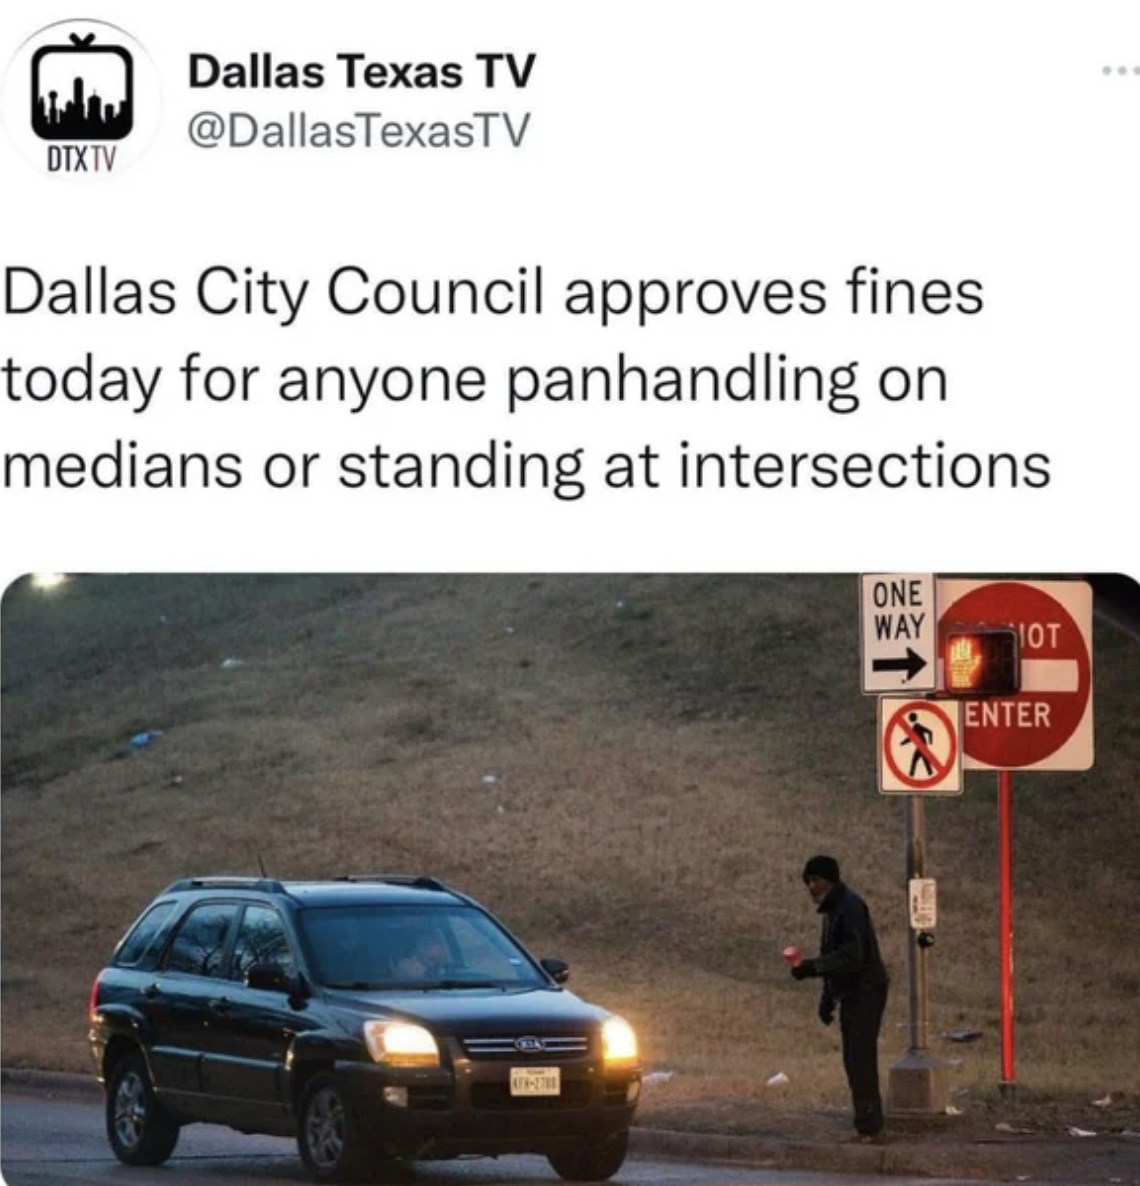 Funny facepalms - asphalt - Dtxtv Dallas Texas Tv Dallas City Council approves fines today for anyone panhandling on medians or standing at intersections One Way Iot Enter